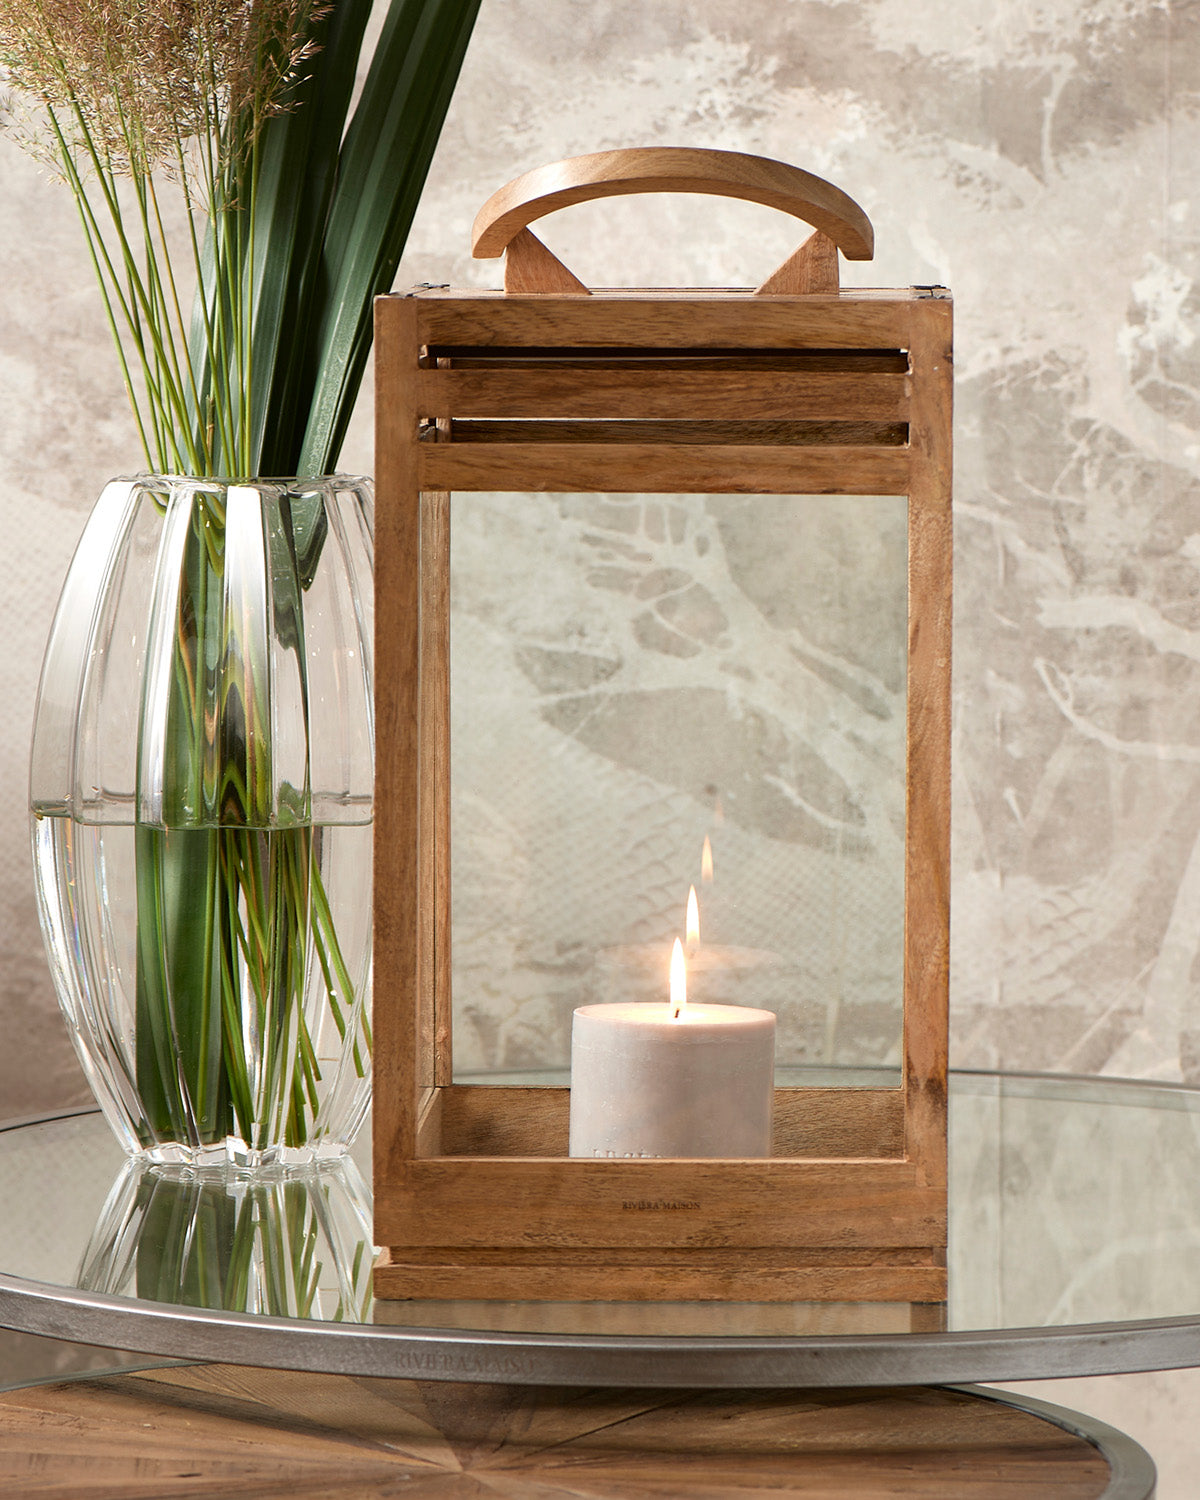 LANTERN constructed from glass and wood with candles on its iron base by Riviera Maison